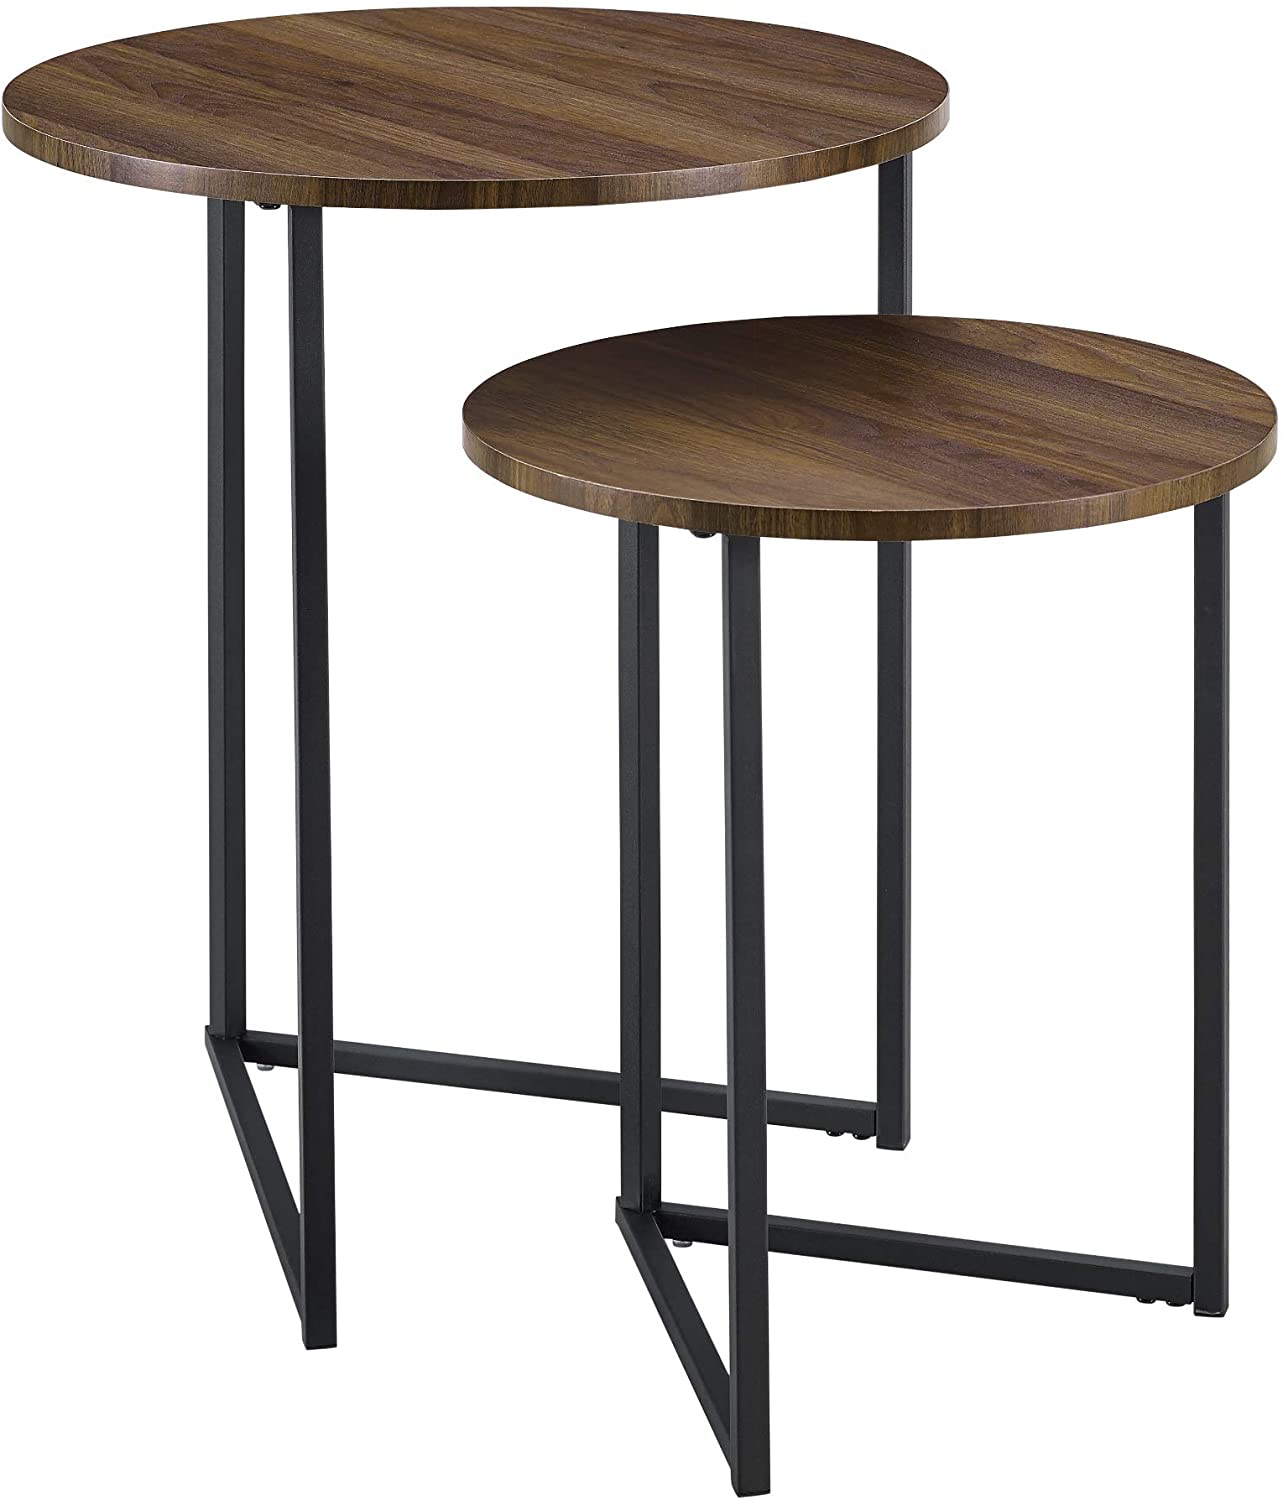 vee nested tables